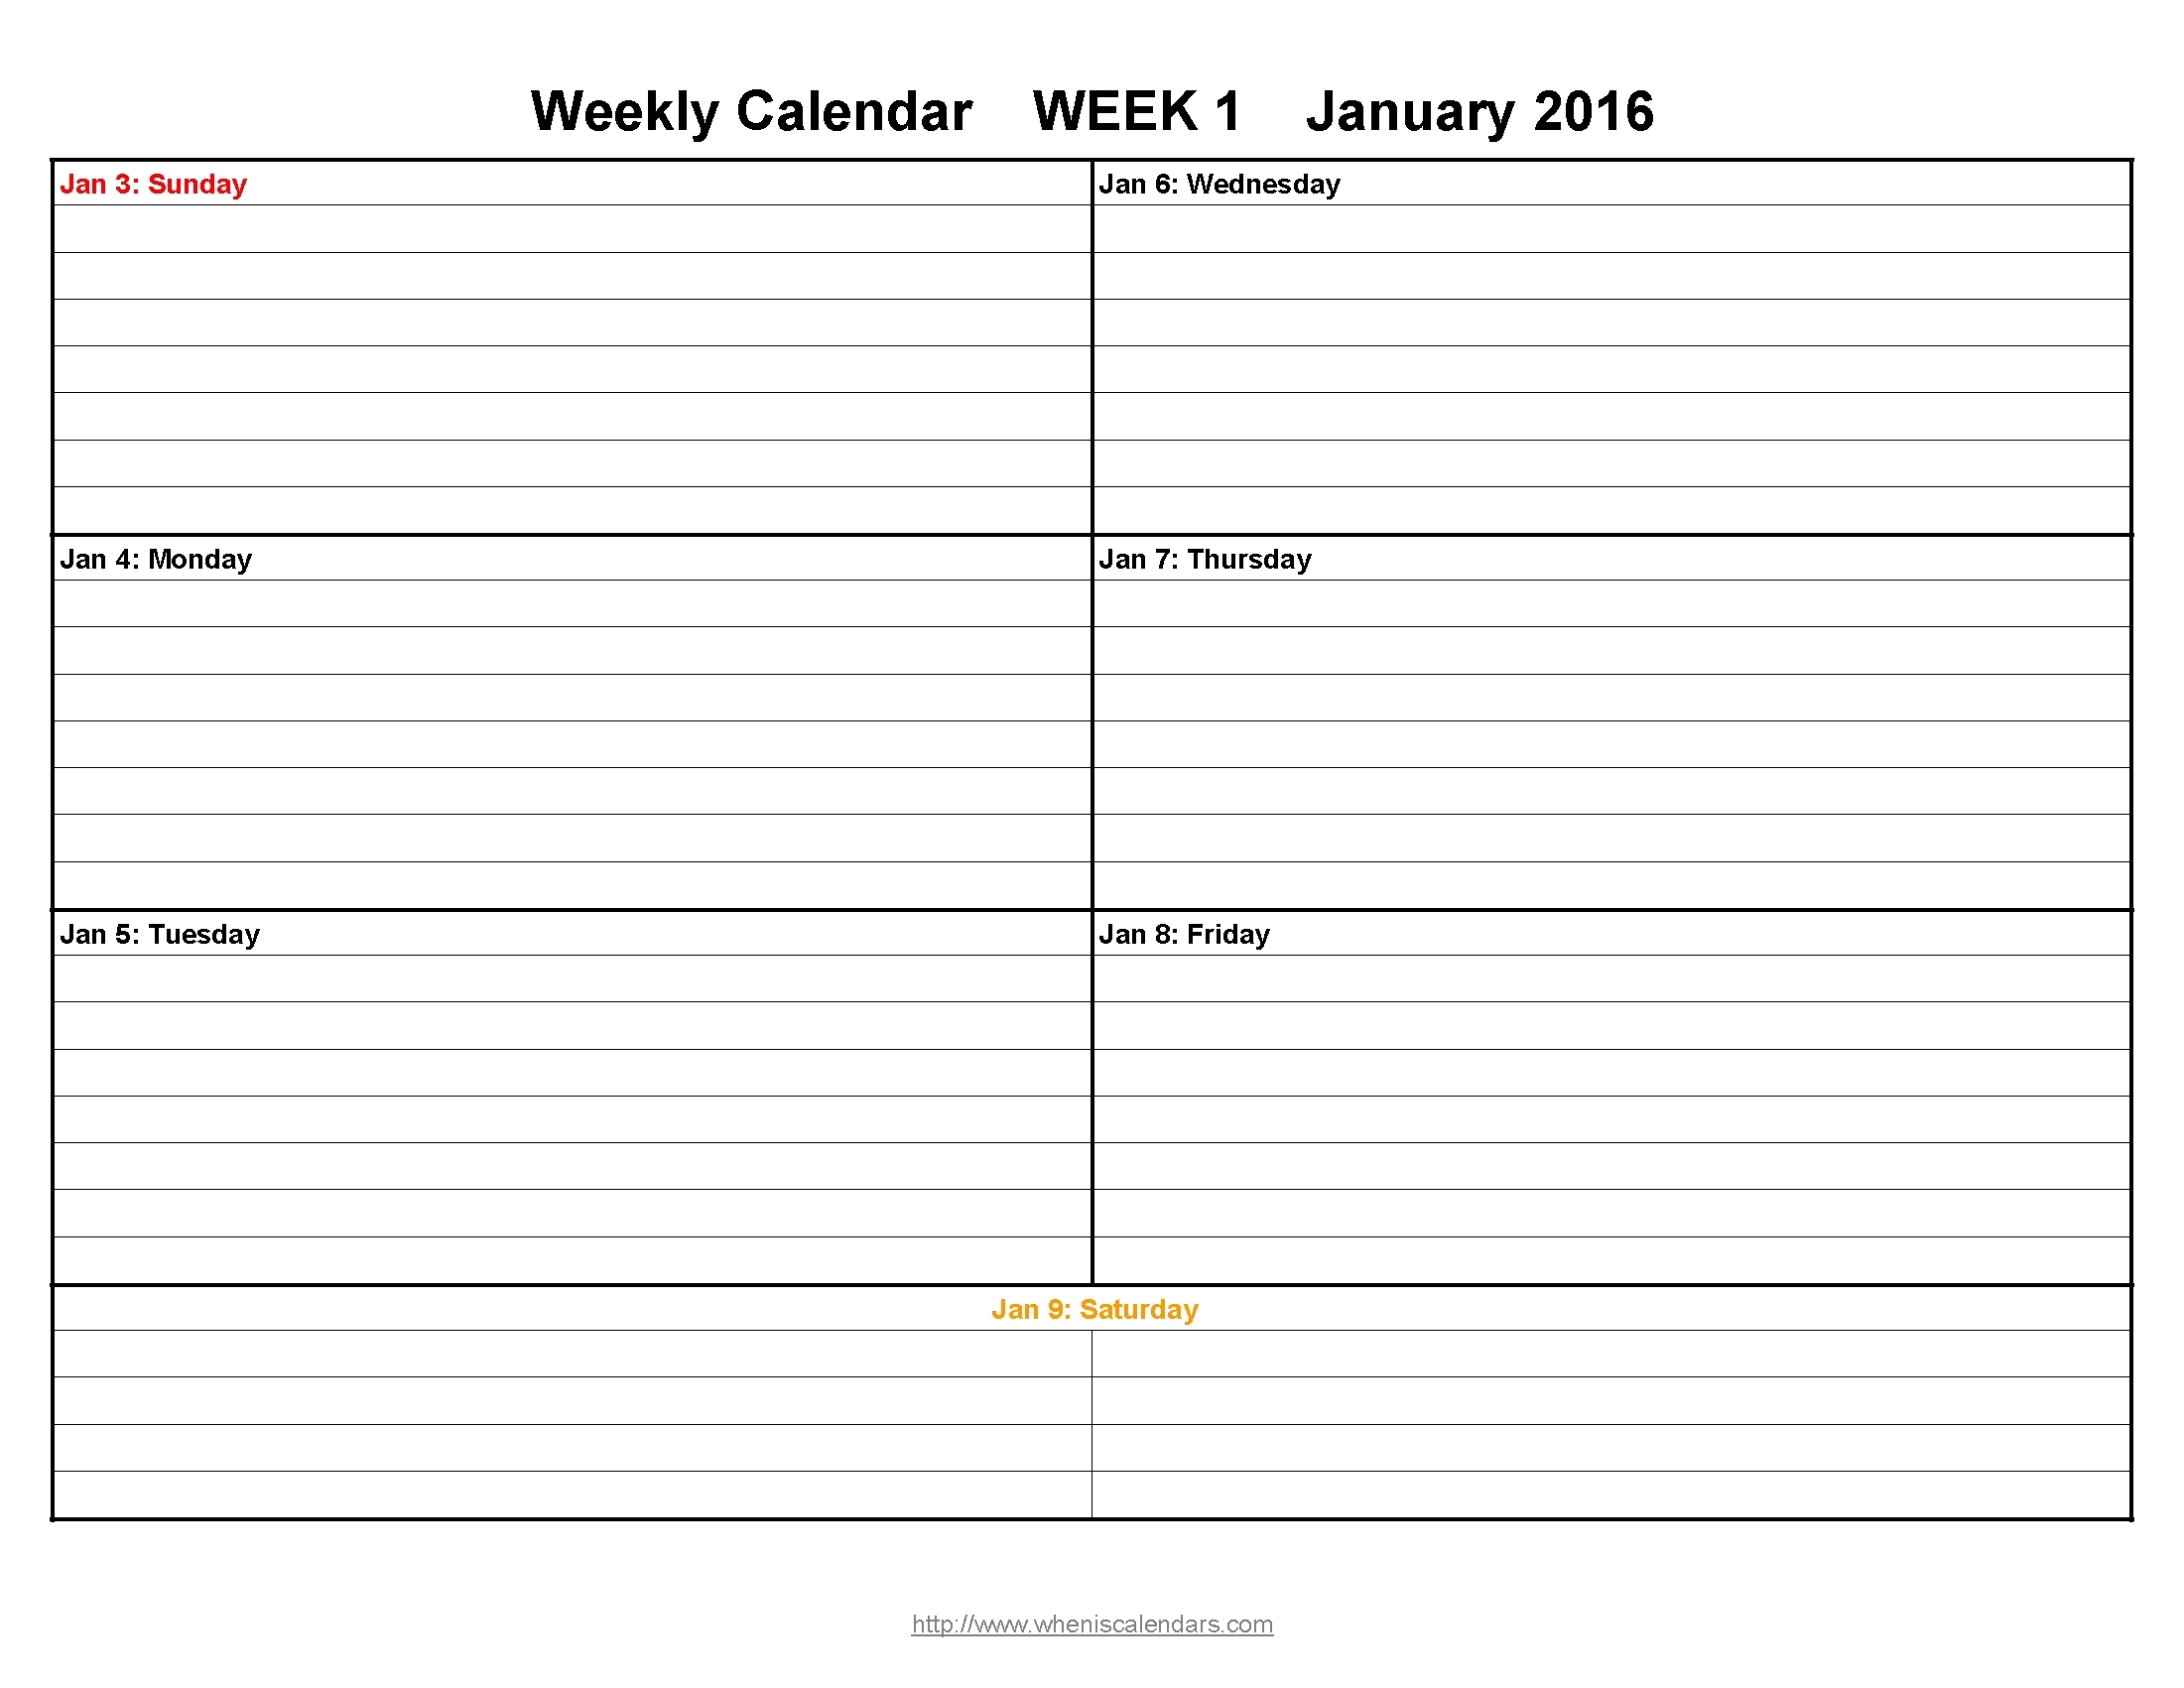 10 Week Calendar Print Out | Cover Letter